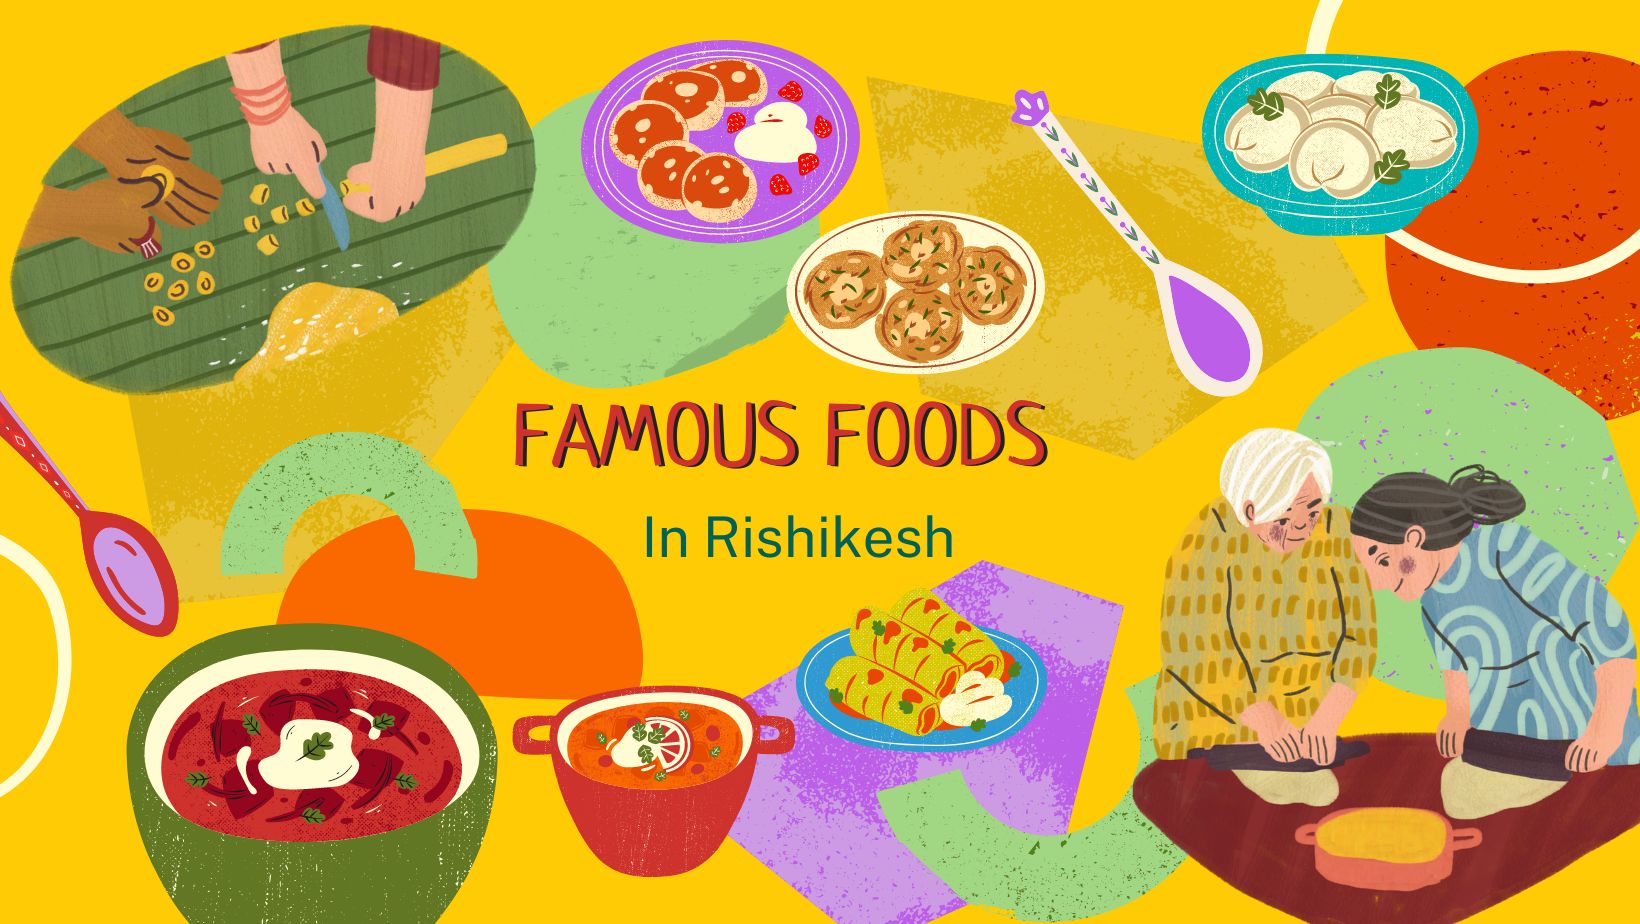 Famous Foods in Rishikesh